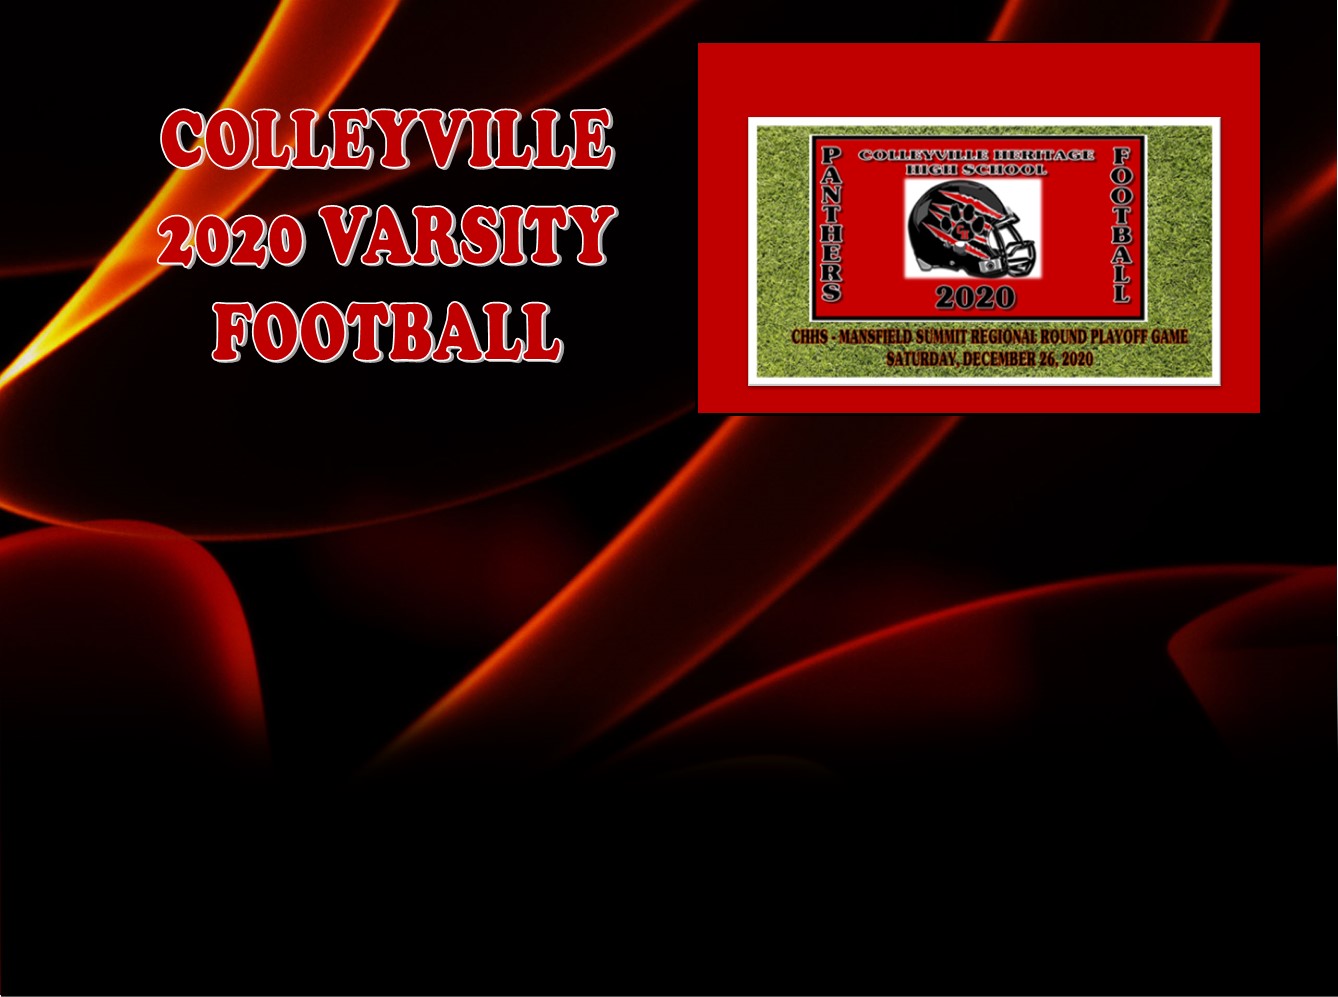 GCISD Football:  Colleyville Heritage Comes Up Short In Regional Round Playoff Game Against Mansfield Summit 34-31